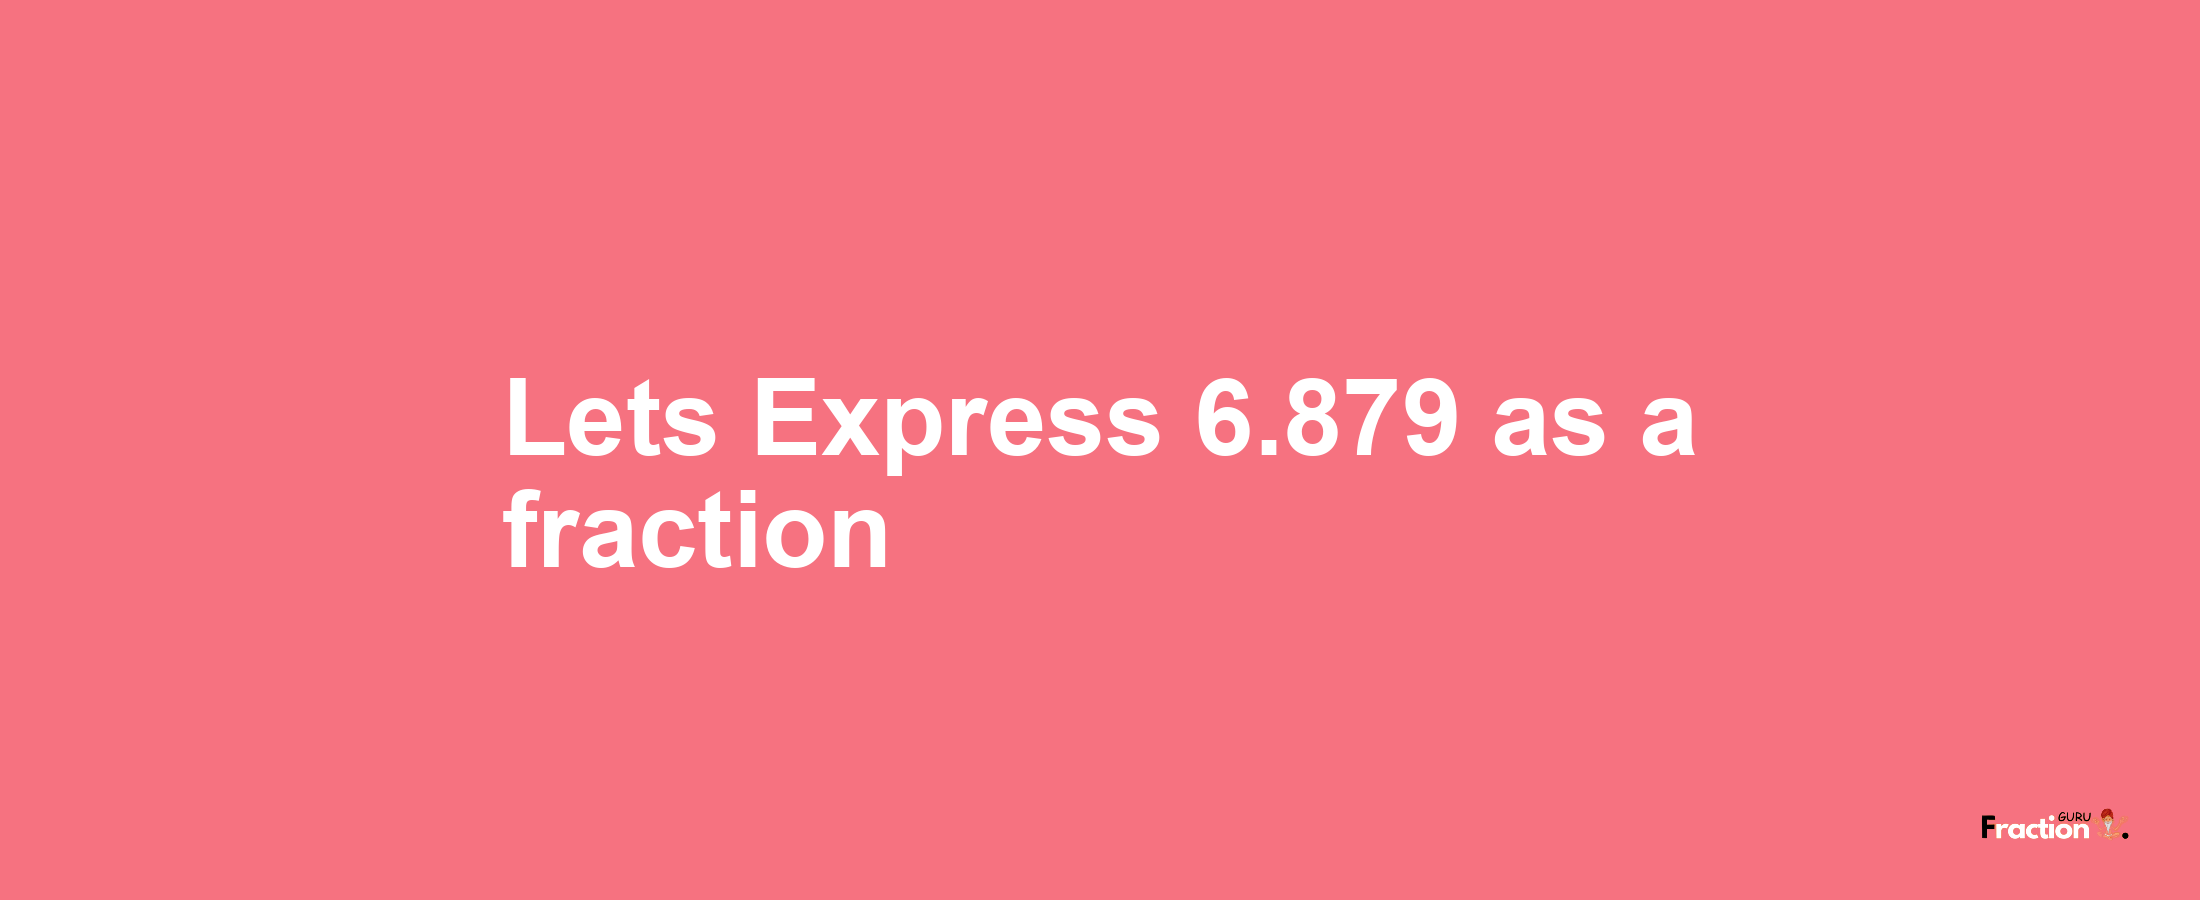 Lets Express 6.879 as afraction